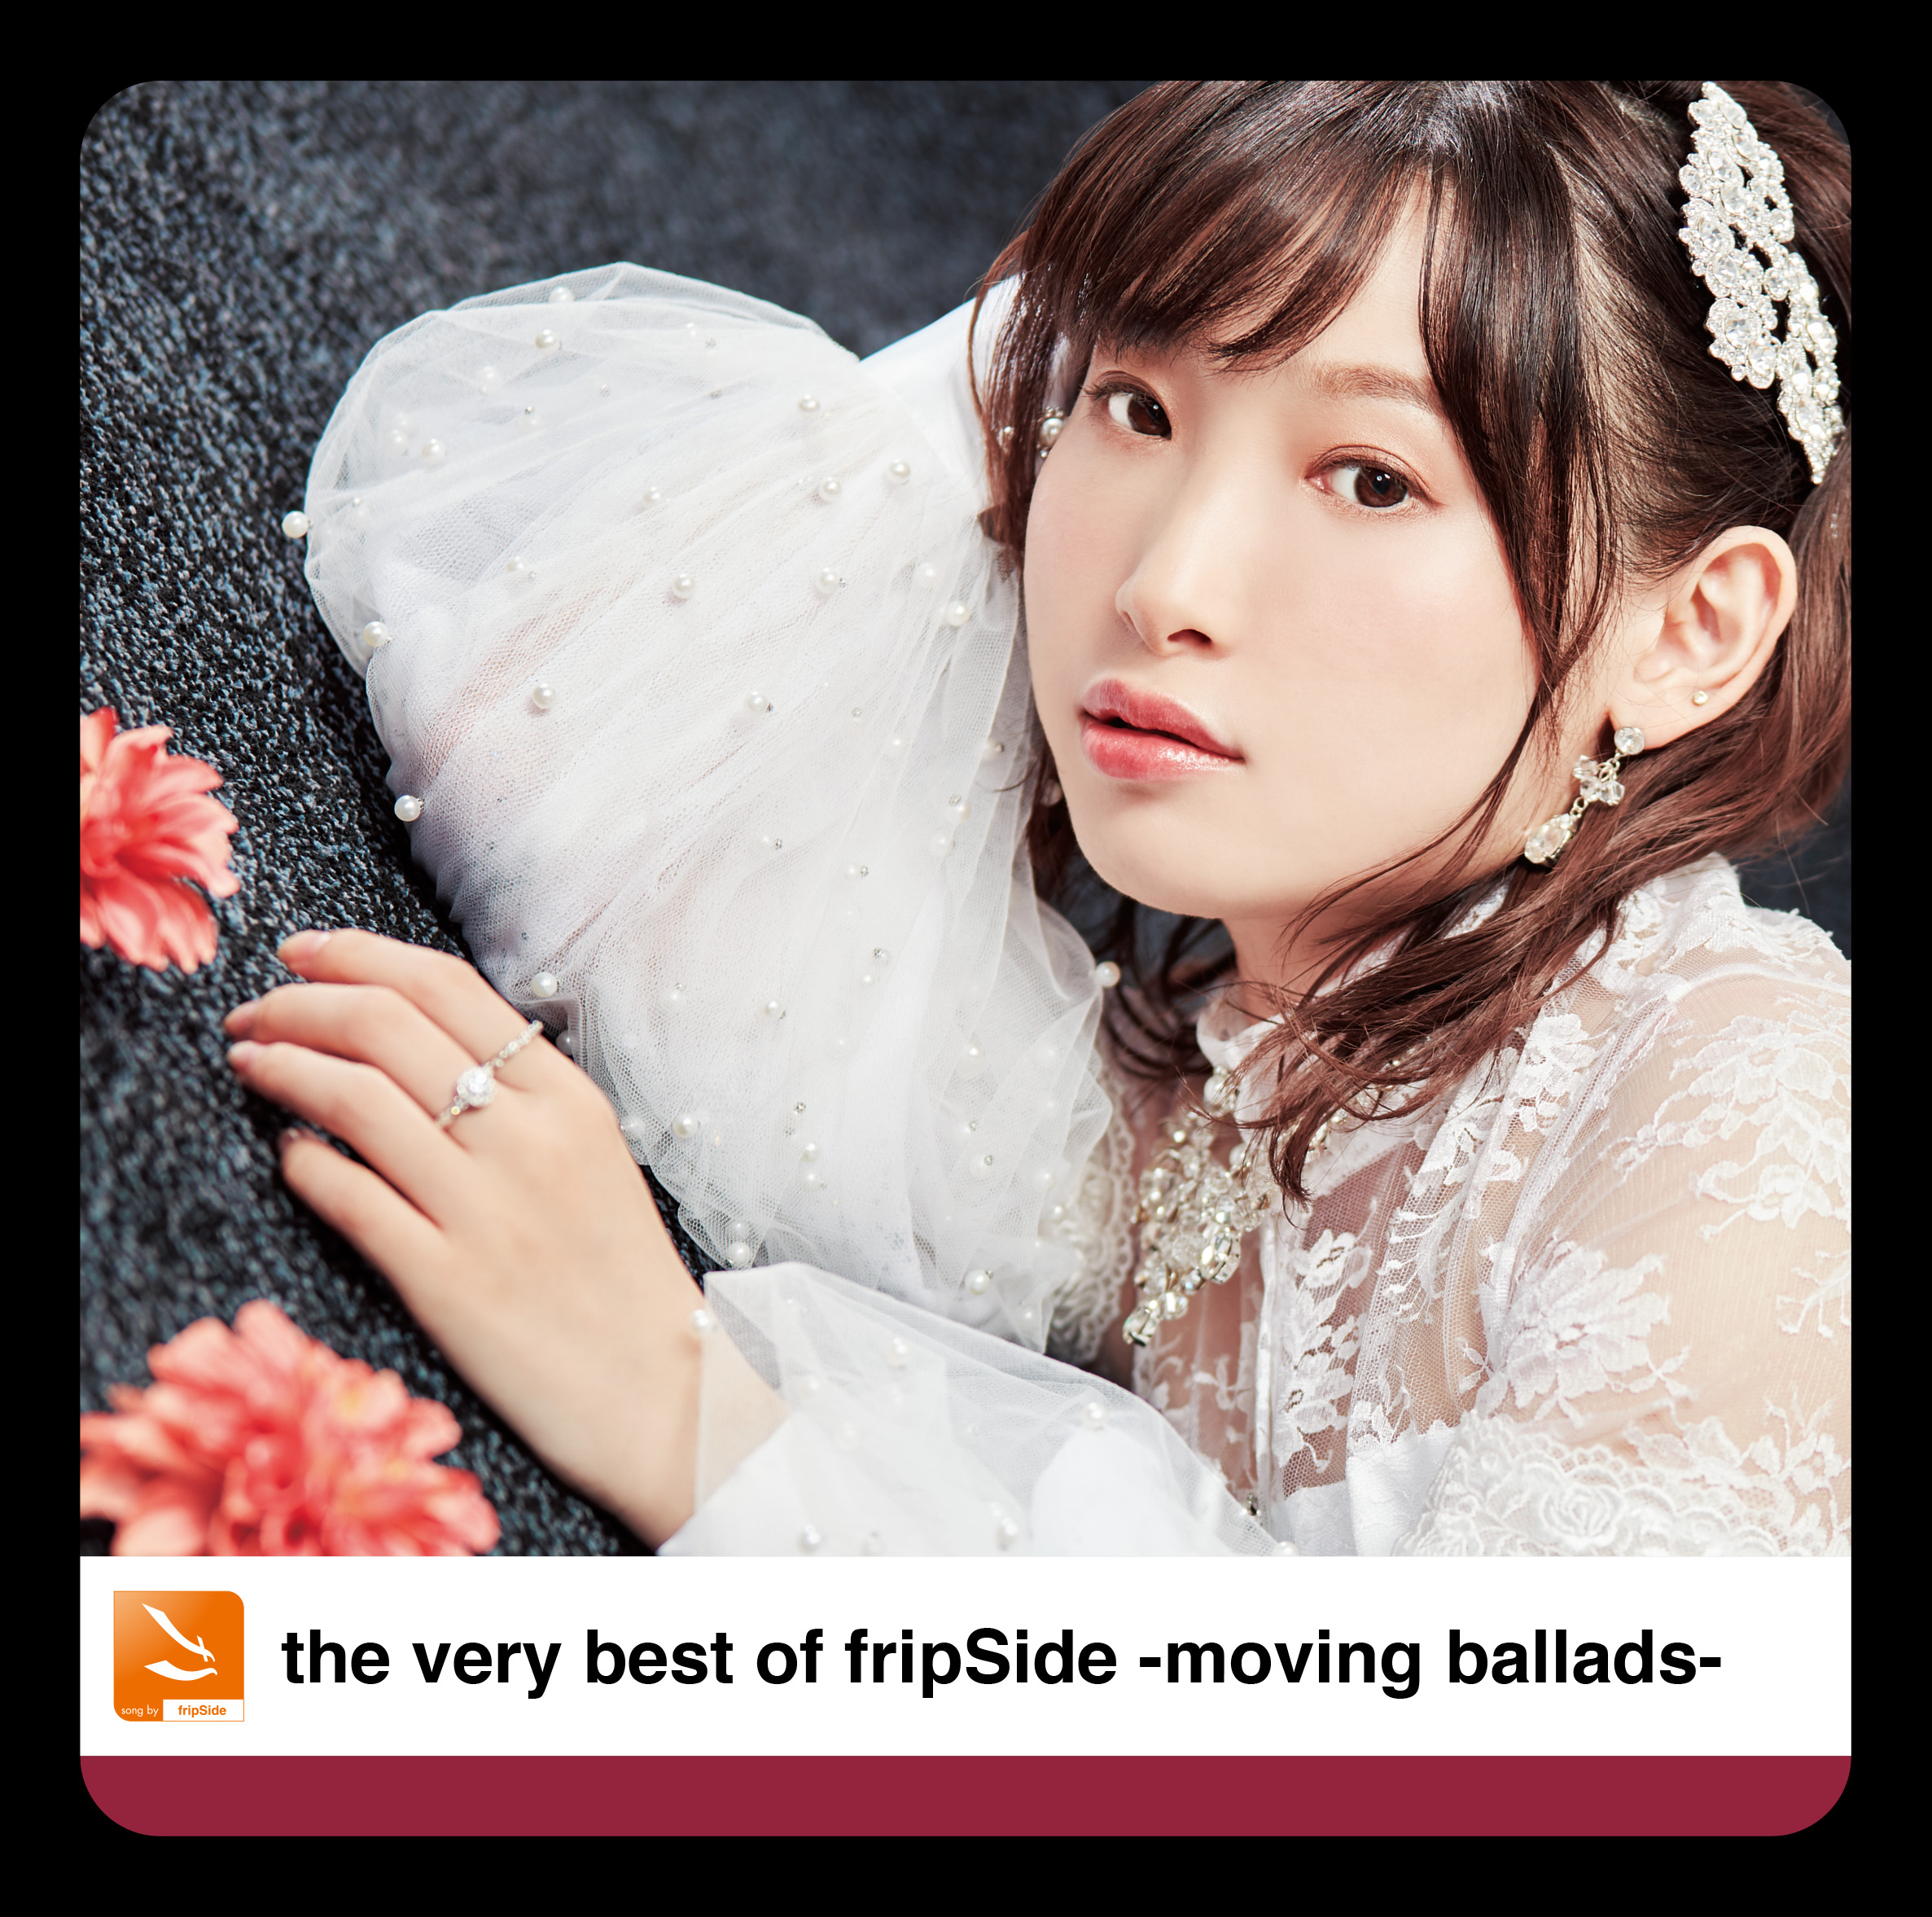 The very best of fripSide -moving ballads- 通常.jpg